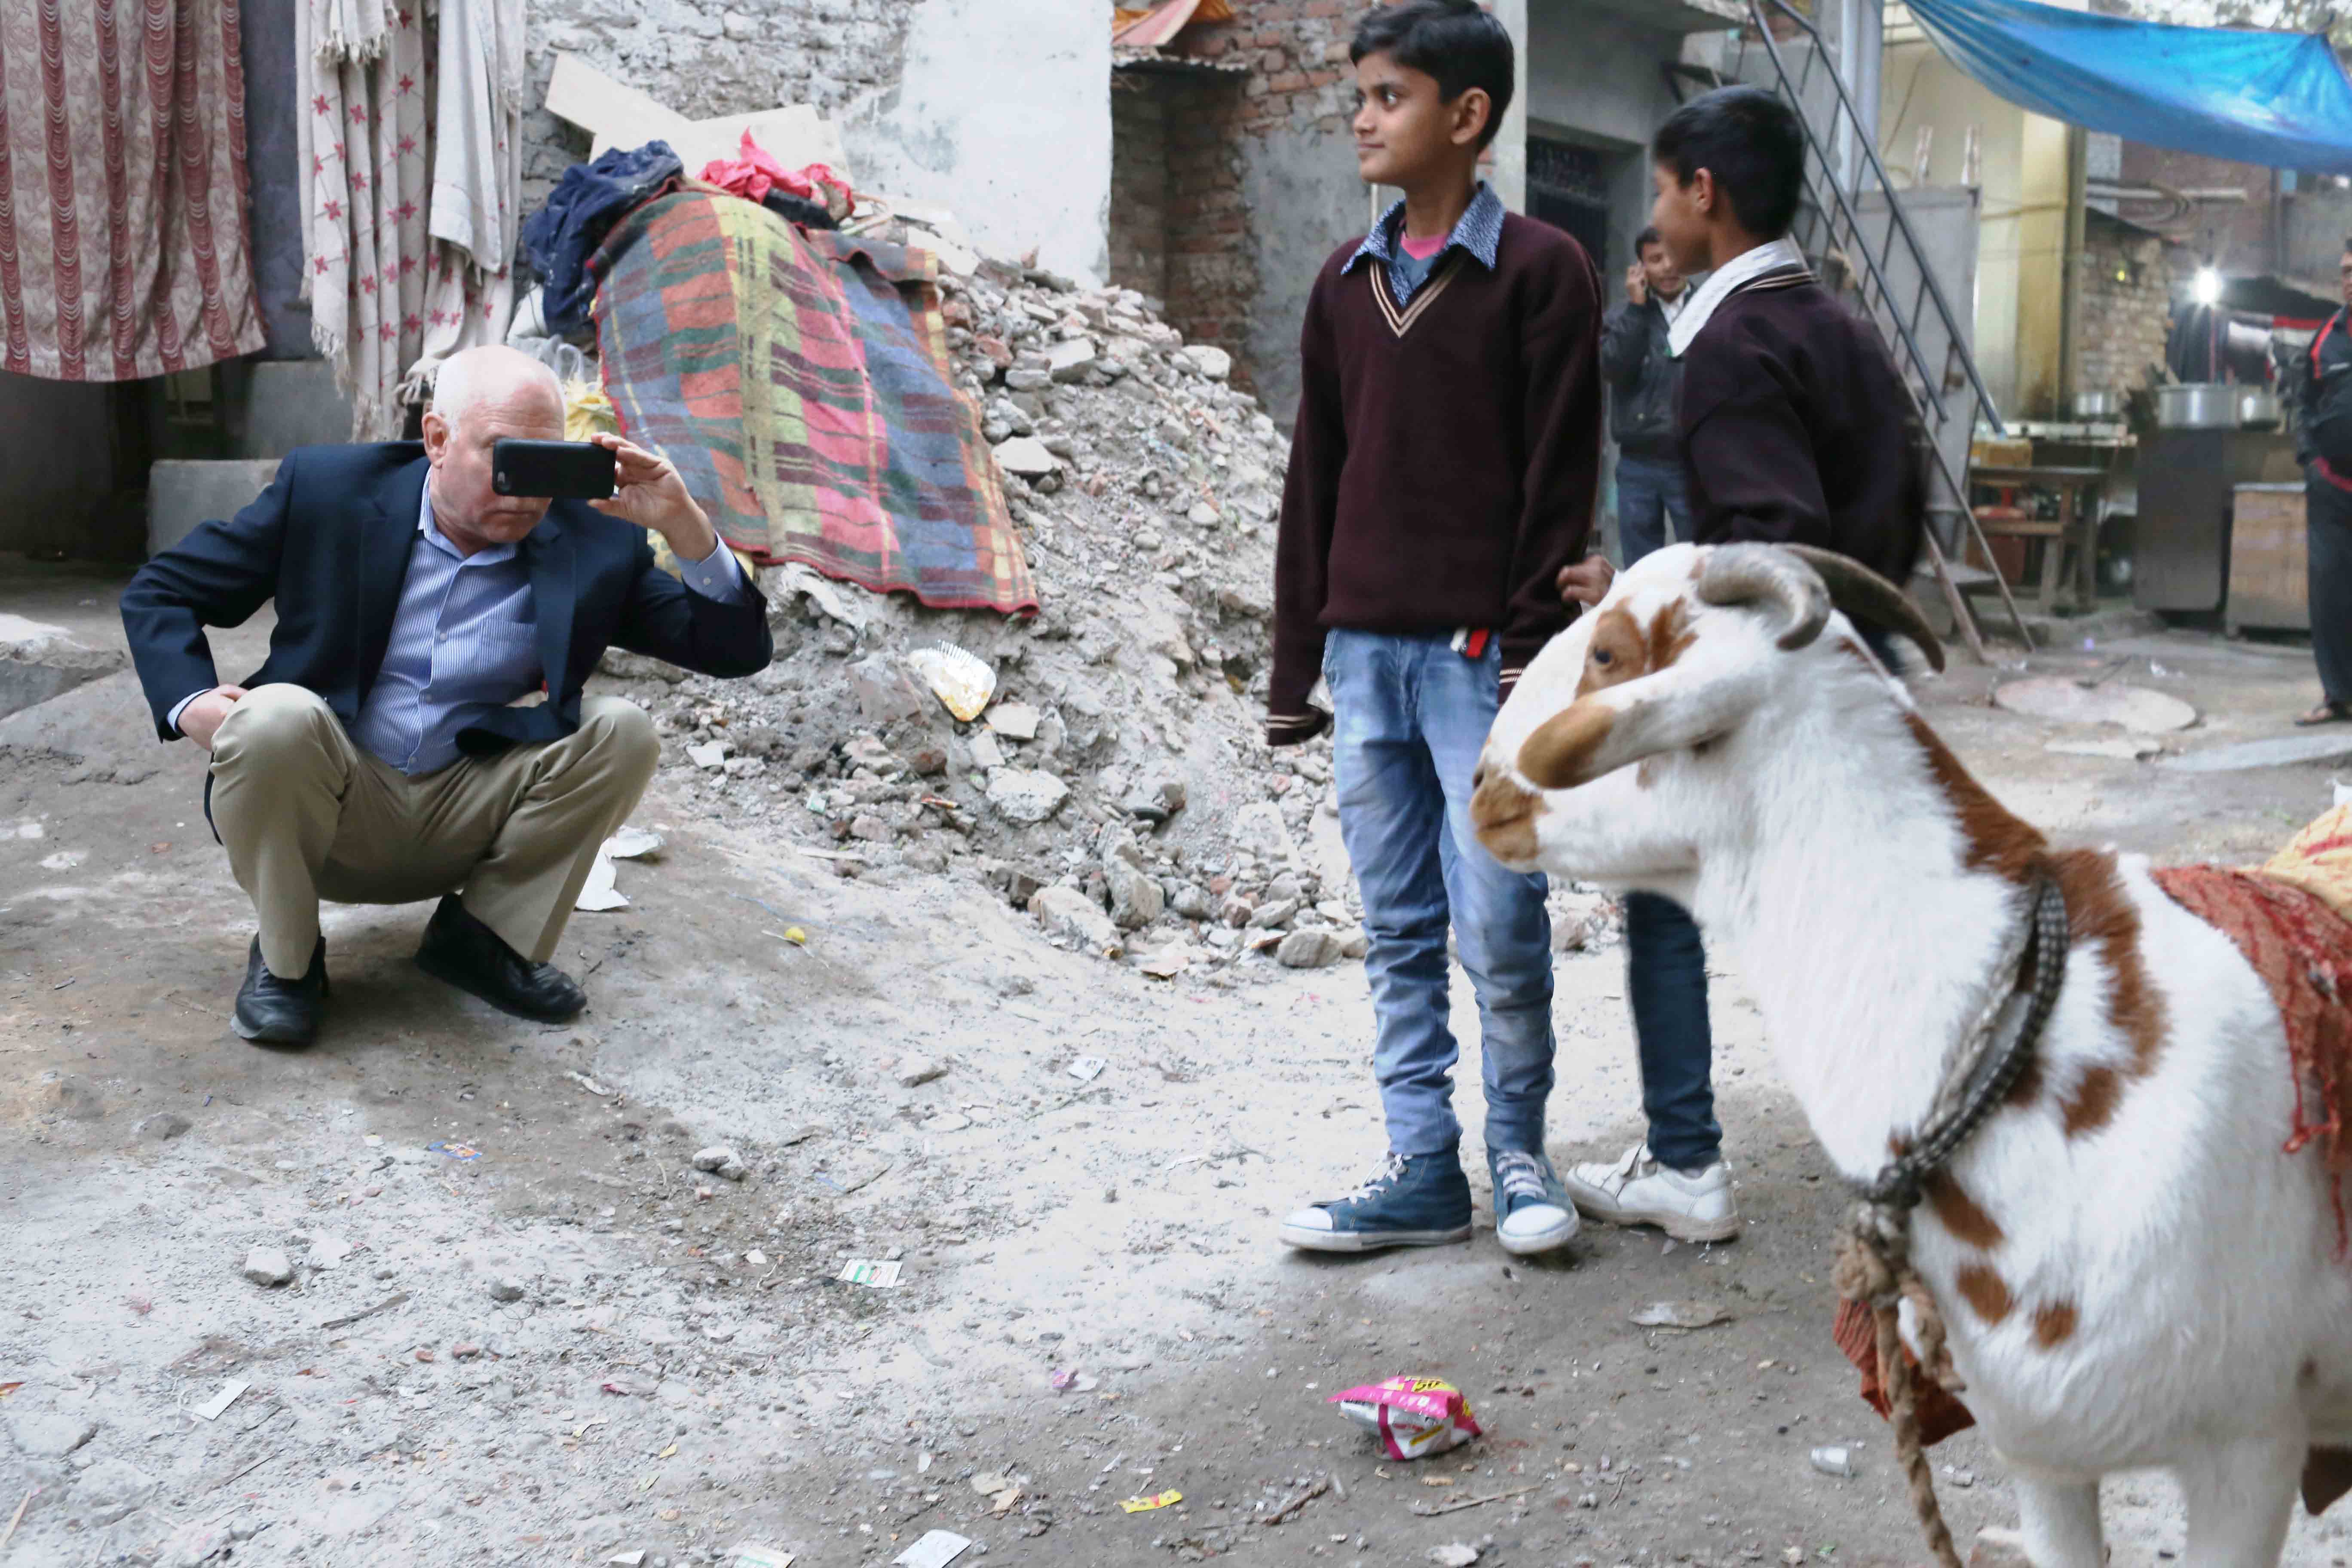 City Moment – Steve McCurry Shoots a Goat, Somewhere in Delhi